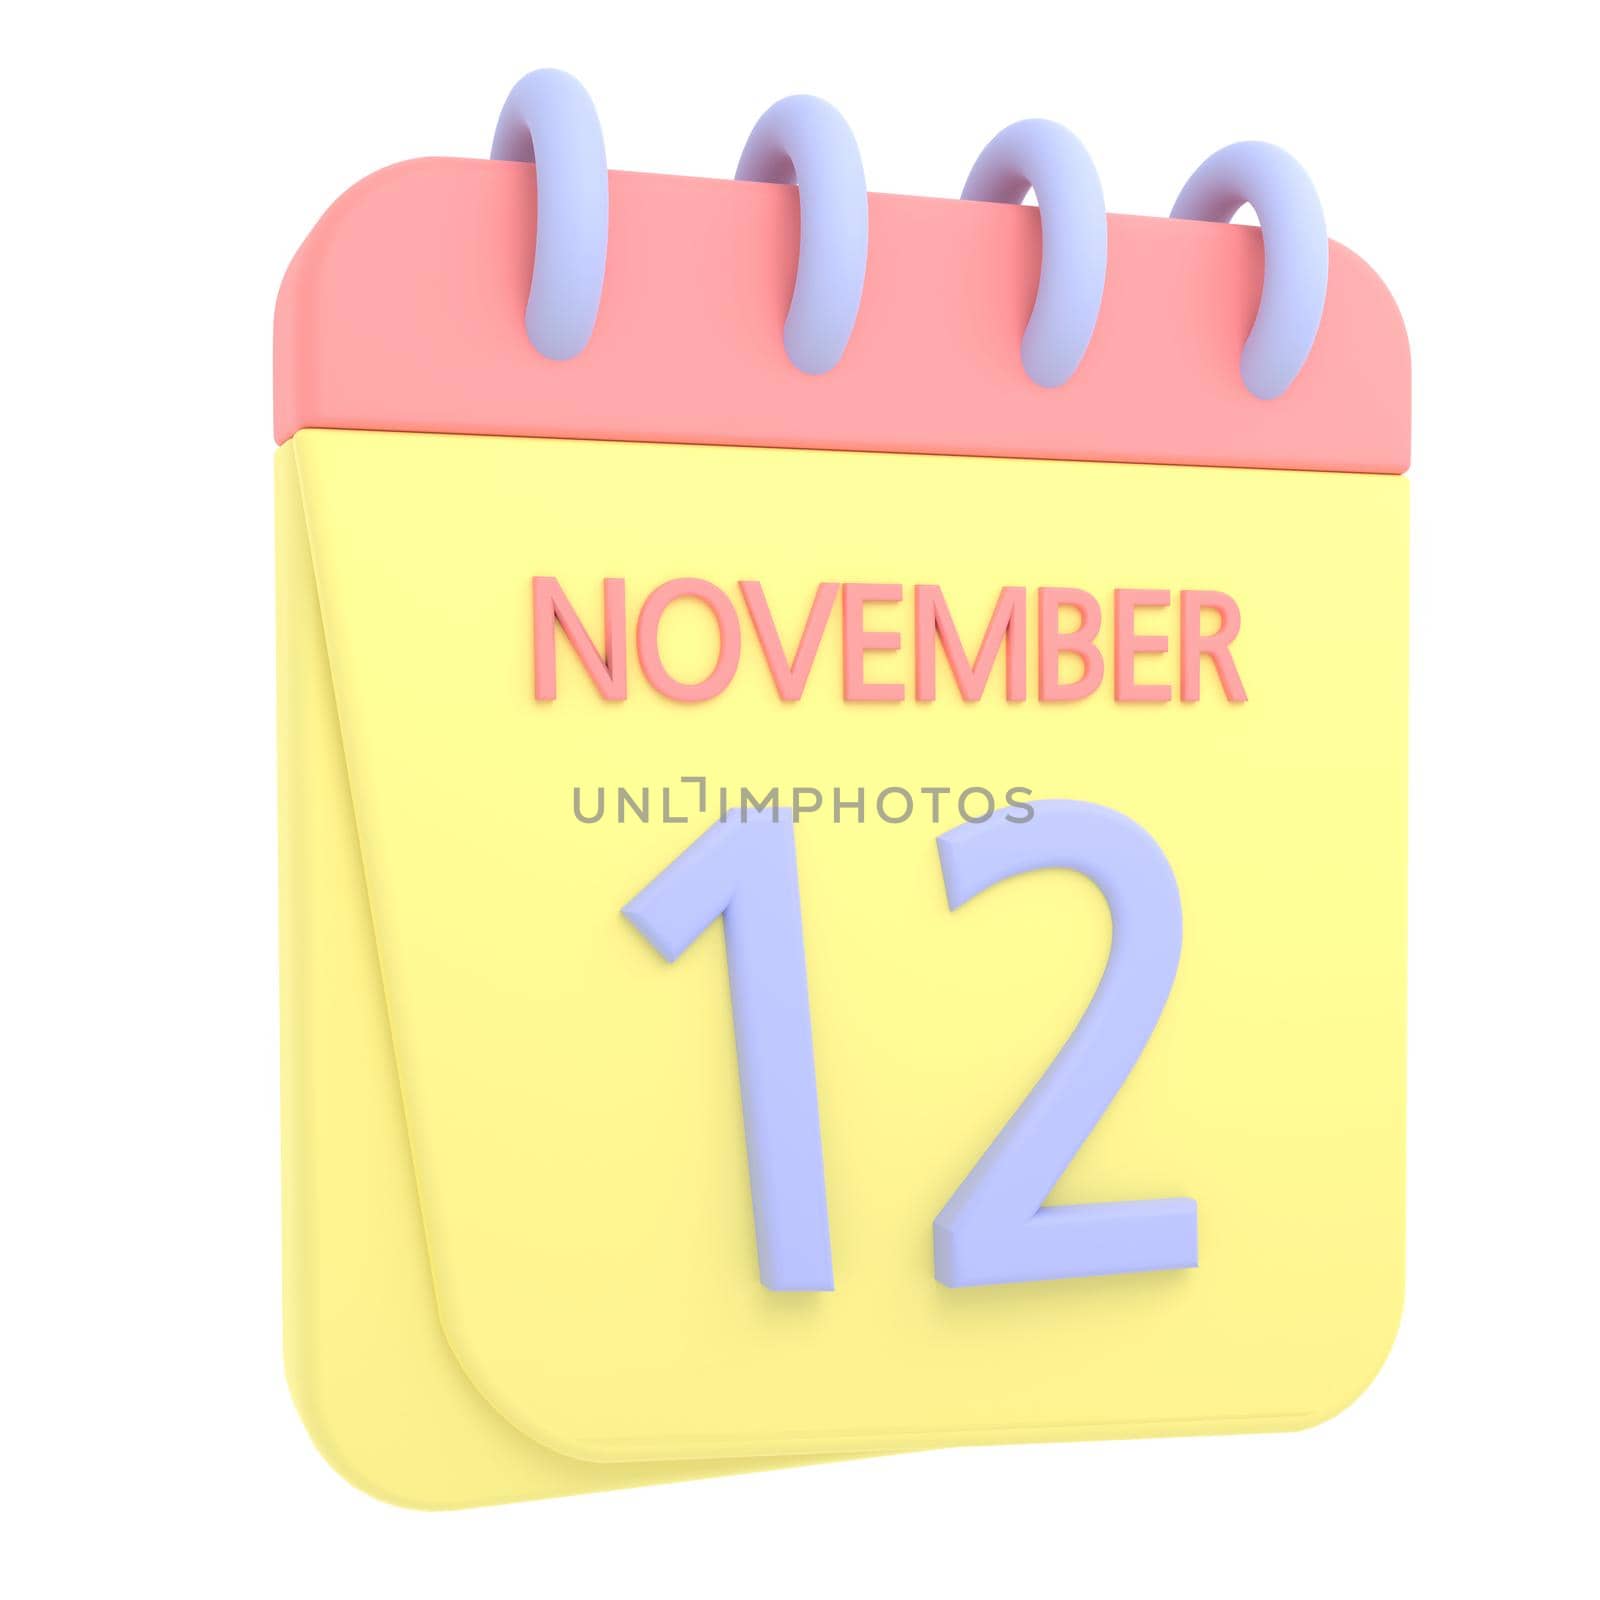 12th November 3D calendar icon. Web style. High resolution image. White background